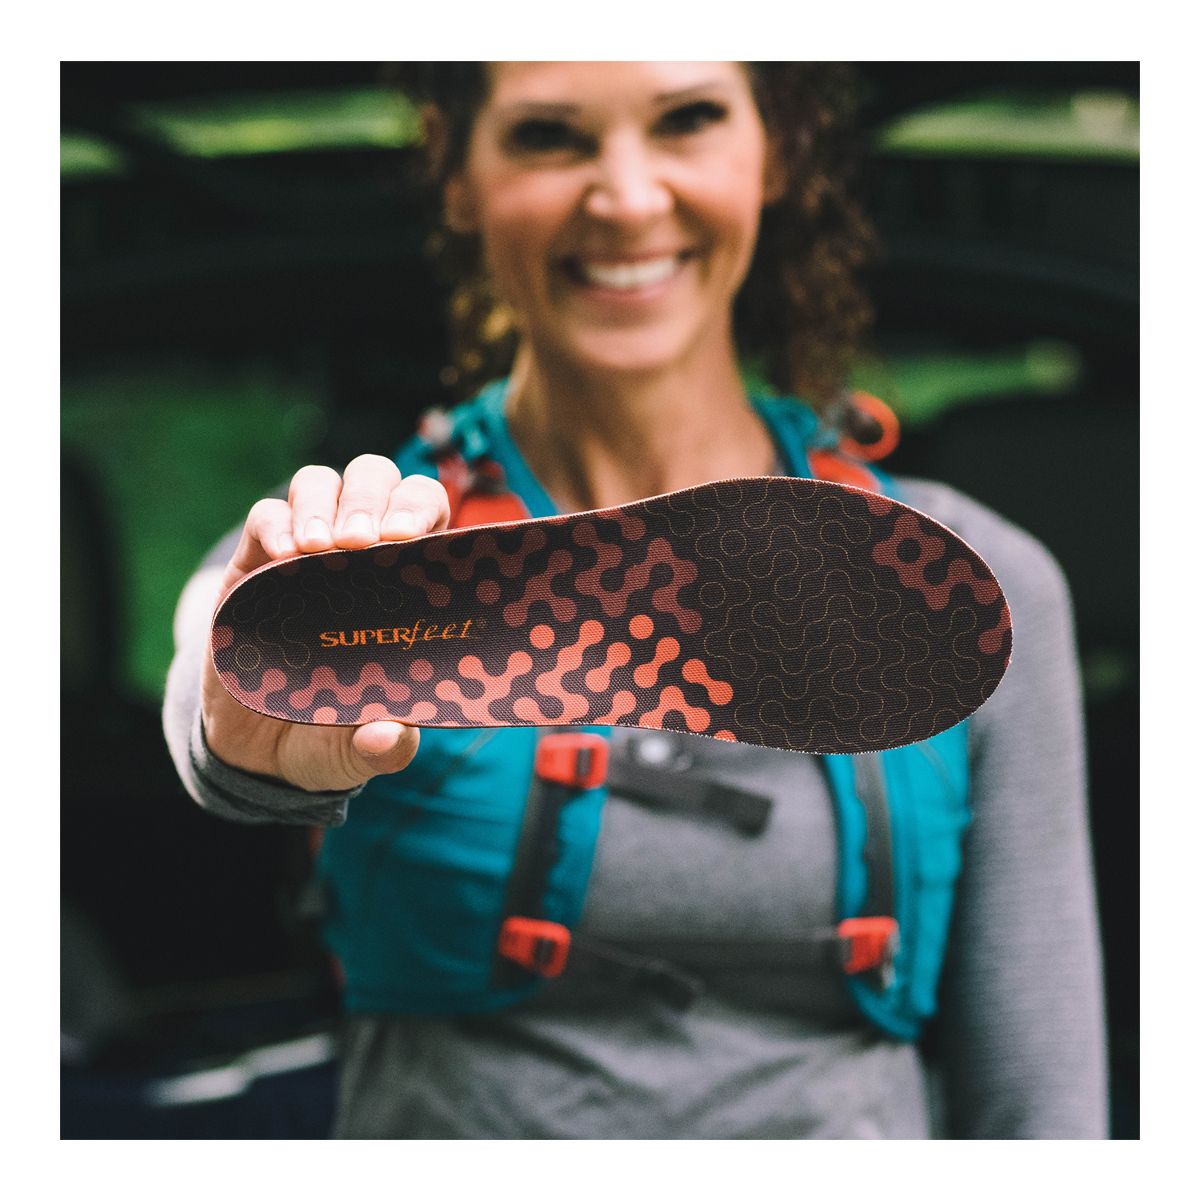 Superfeet Go Comfort Athletic Insoles Shoe Inserts